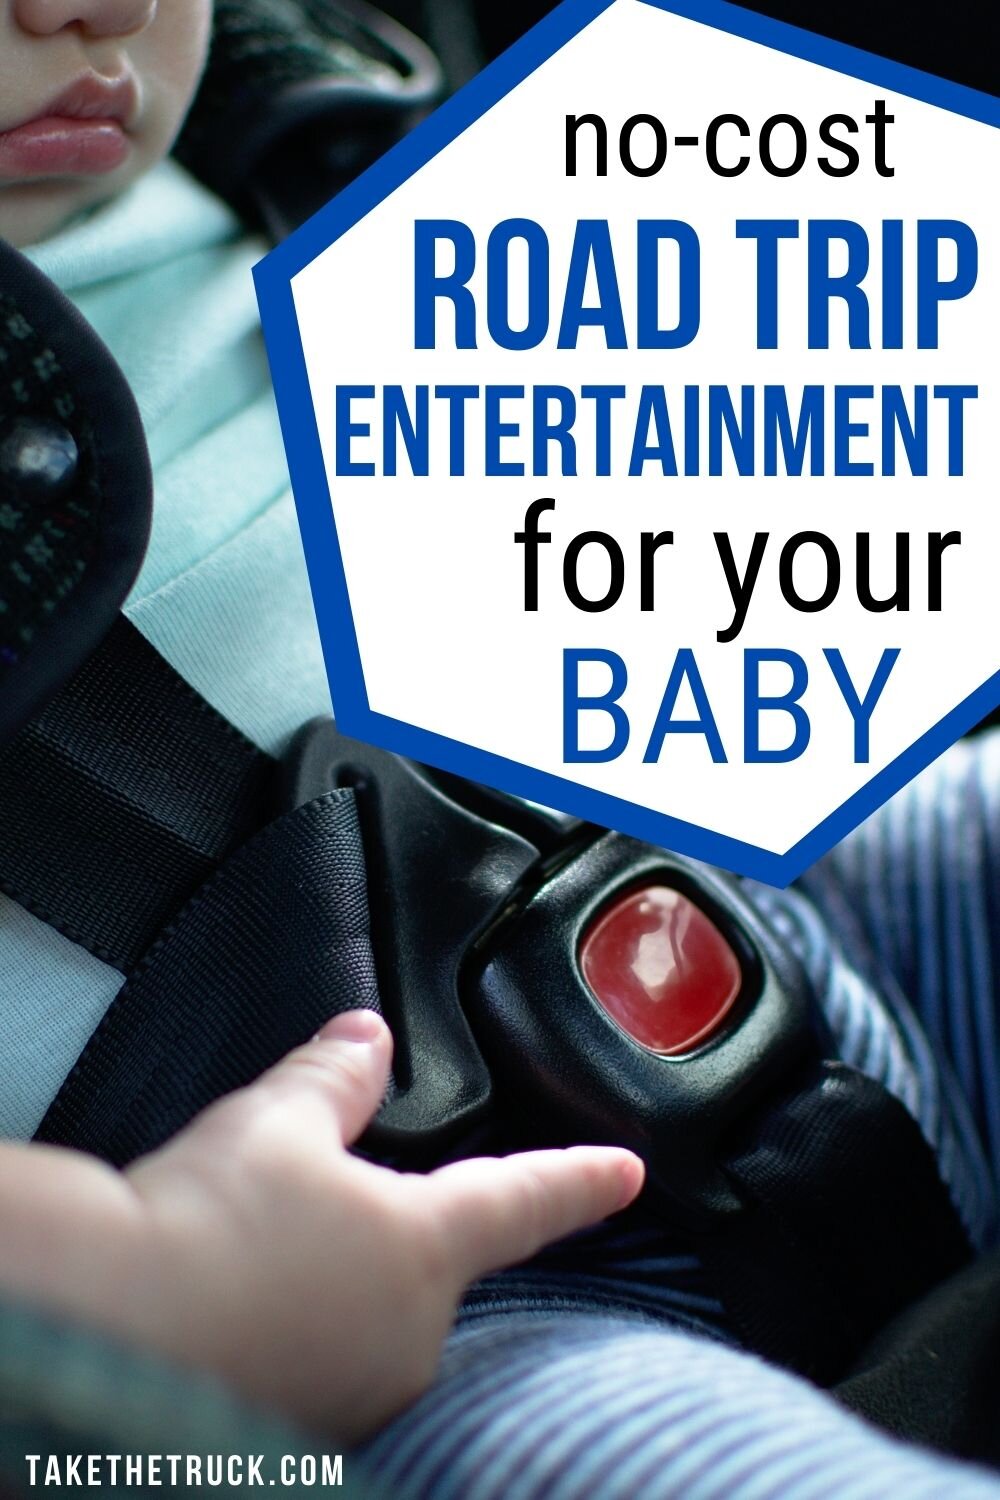 If you’re taking a budget road trip with your baby, read this post for inexpensive travel toys just right for a baby or one year old. Don’t spend your money on baby road trip travel toys!